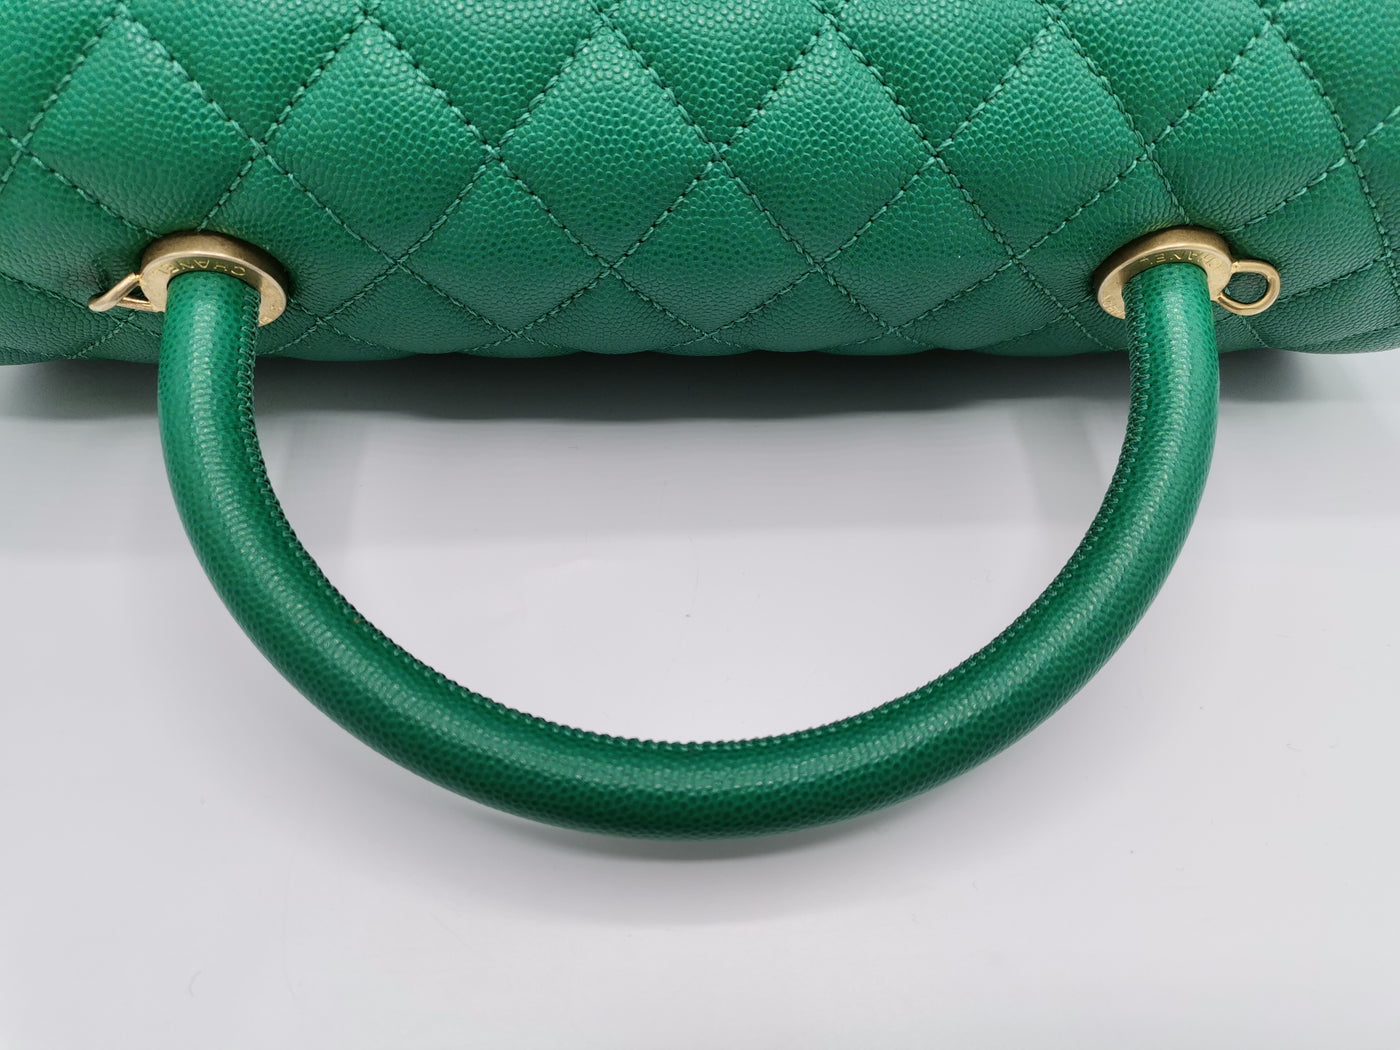 CHANEL coco handle green caviar leather bag with gold hardware